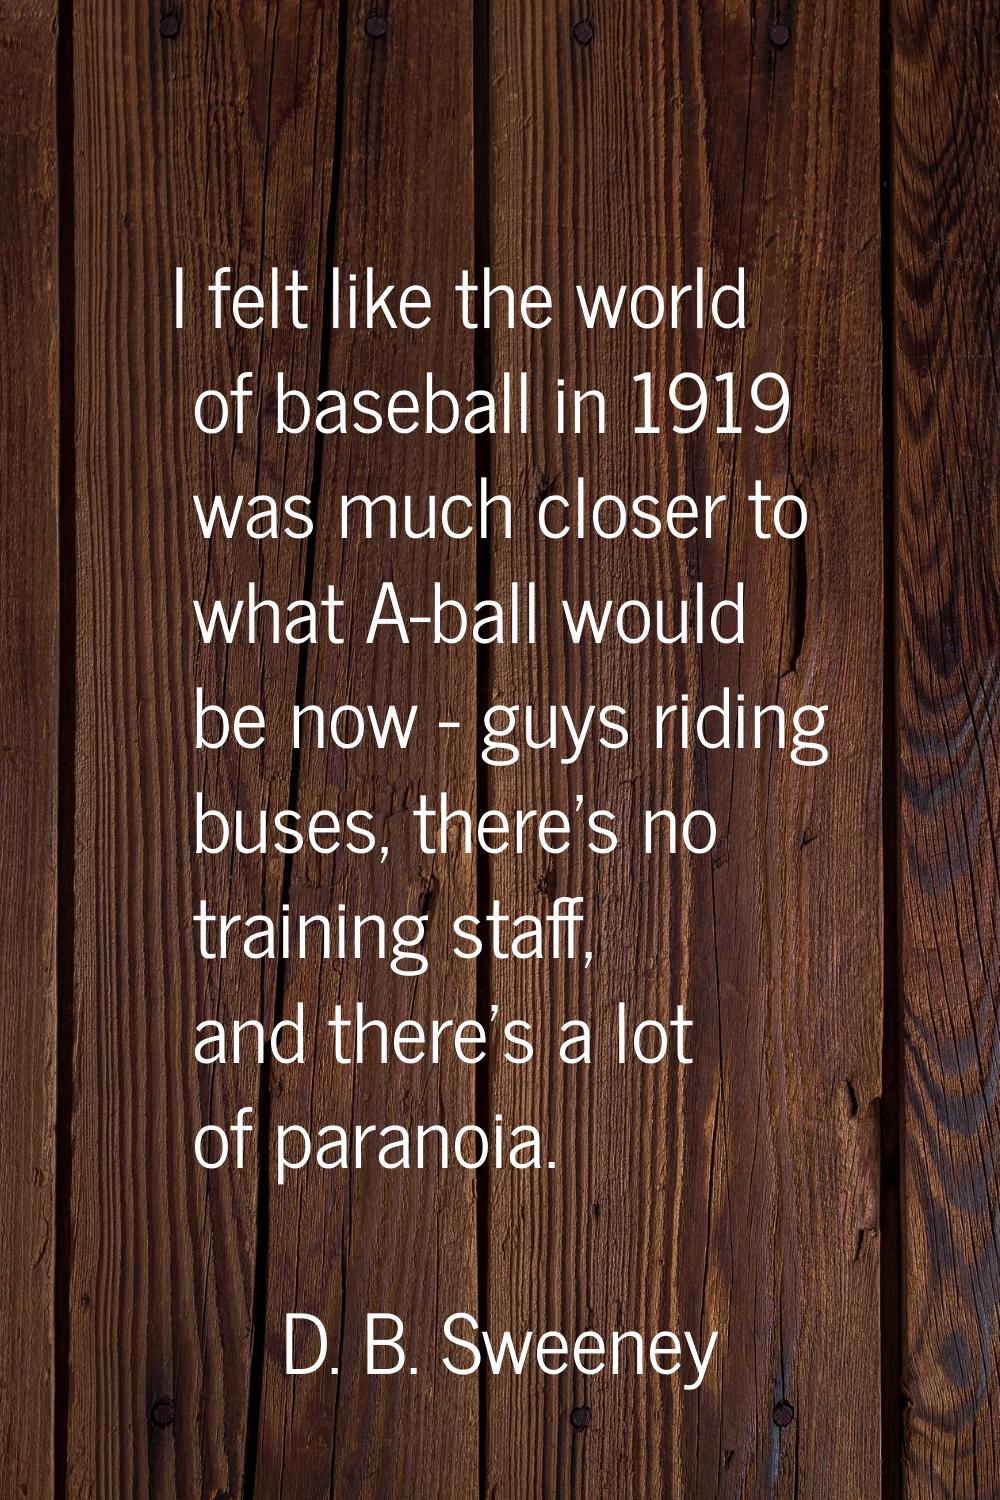 I felt like the world of baseball in 1919 was much closer to what A-ball would be now - guys riding